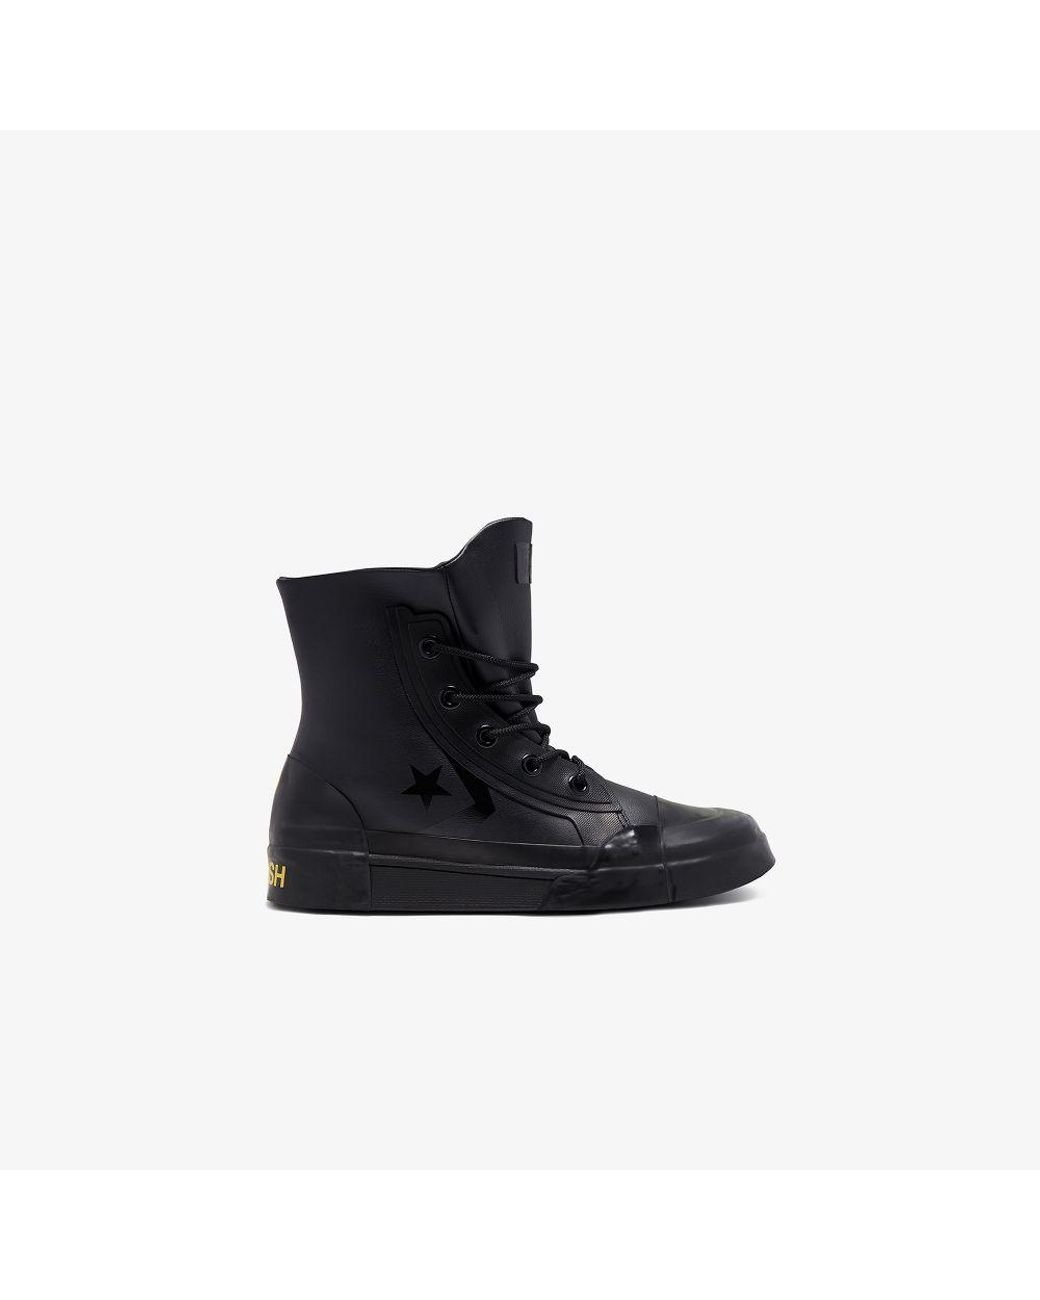 Converse X Ambush Pro Leather High Top Sneakers in Black | Lyst